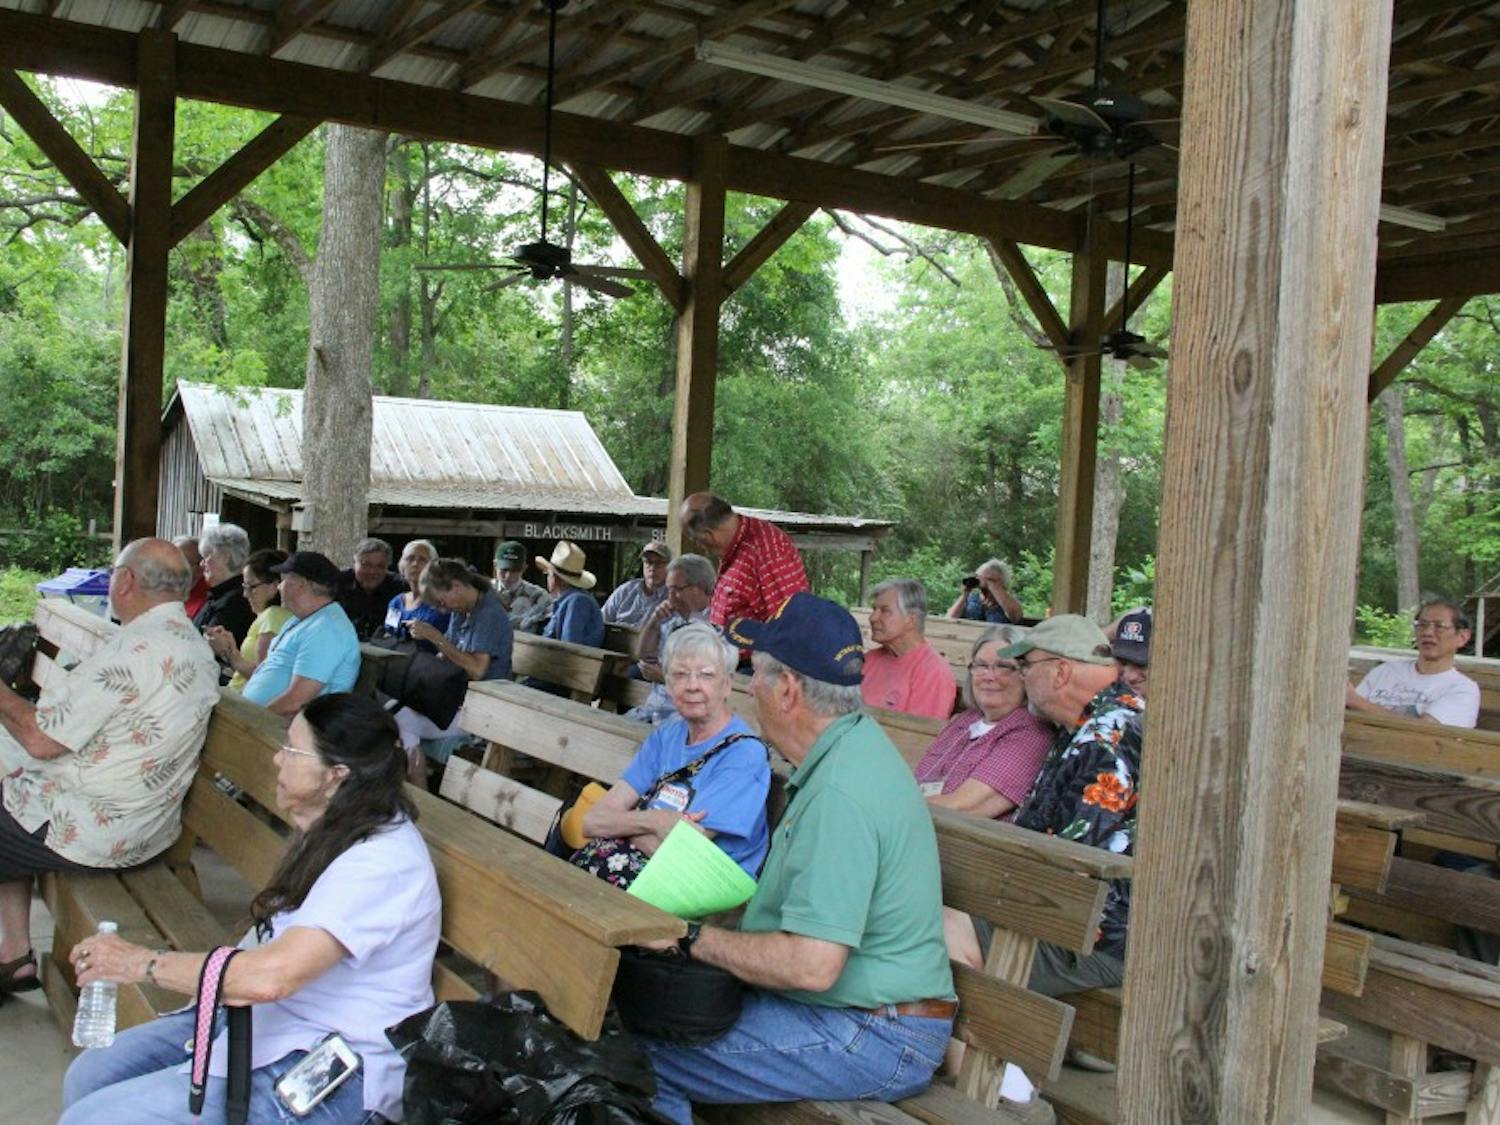 At the Old-Time Music Festival&nbsp;on Saturday, April 29 in Loachapoka, Ala.